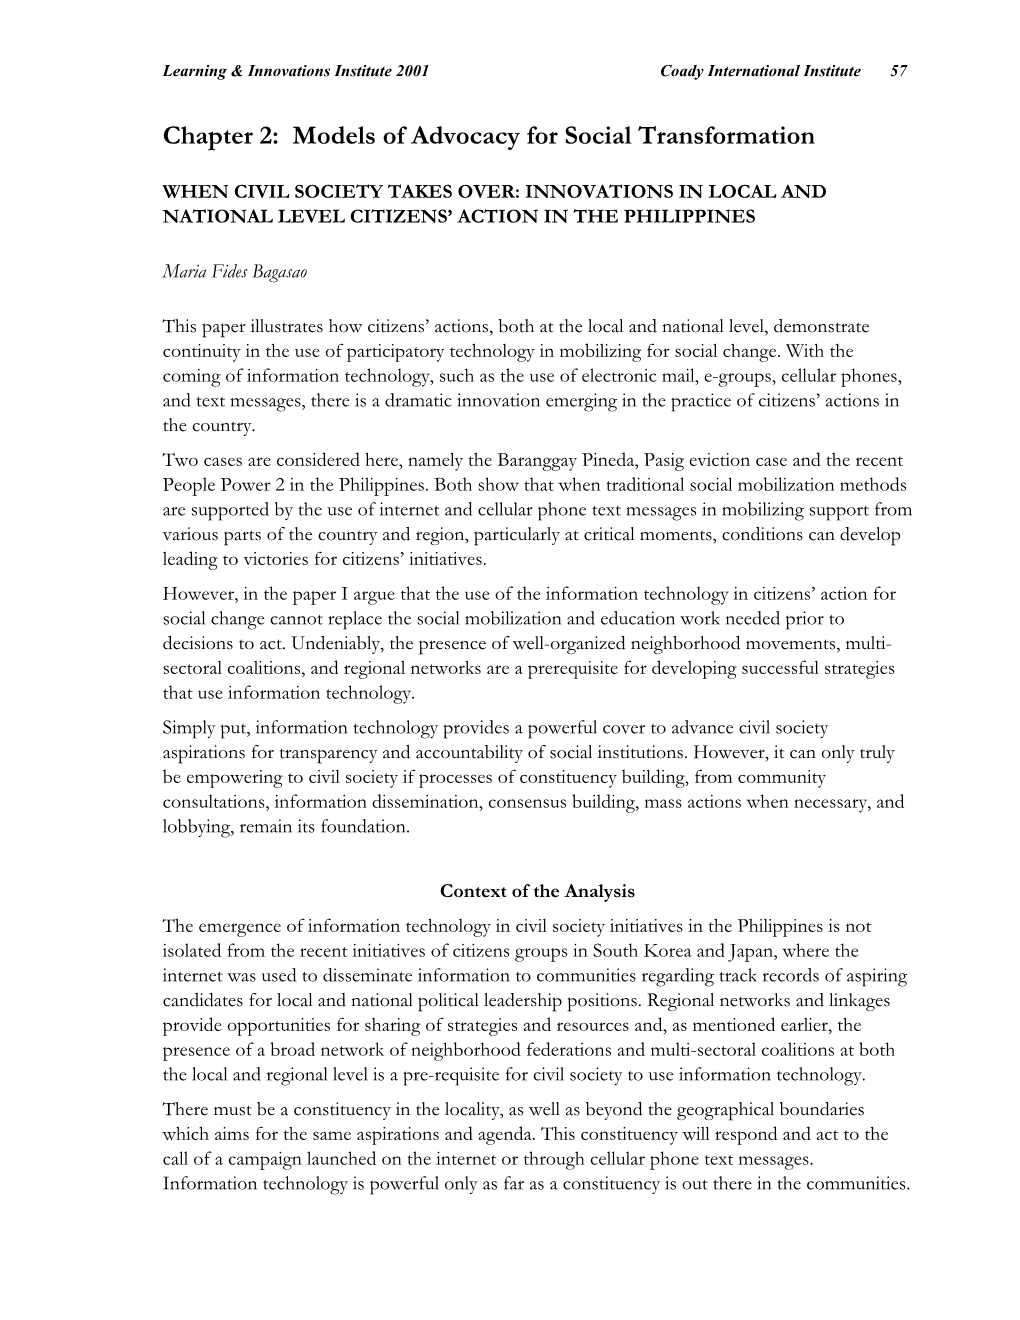 When Civil Society Takes Over: Innovations in Local and National Level Citizens’ Action in the Philippines